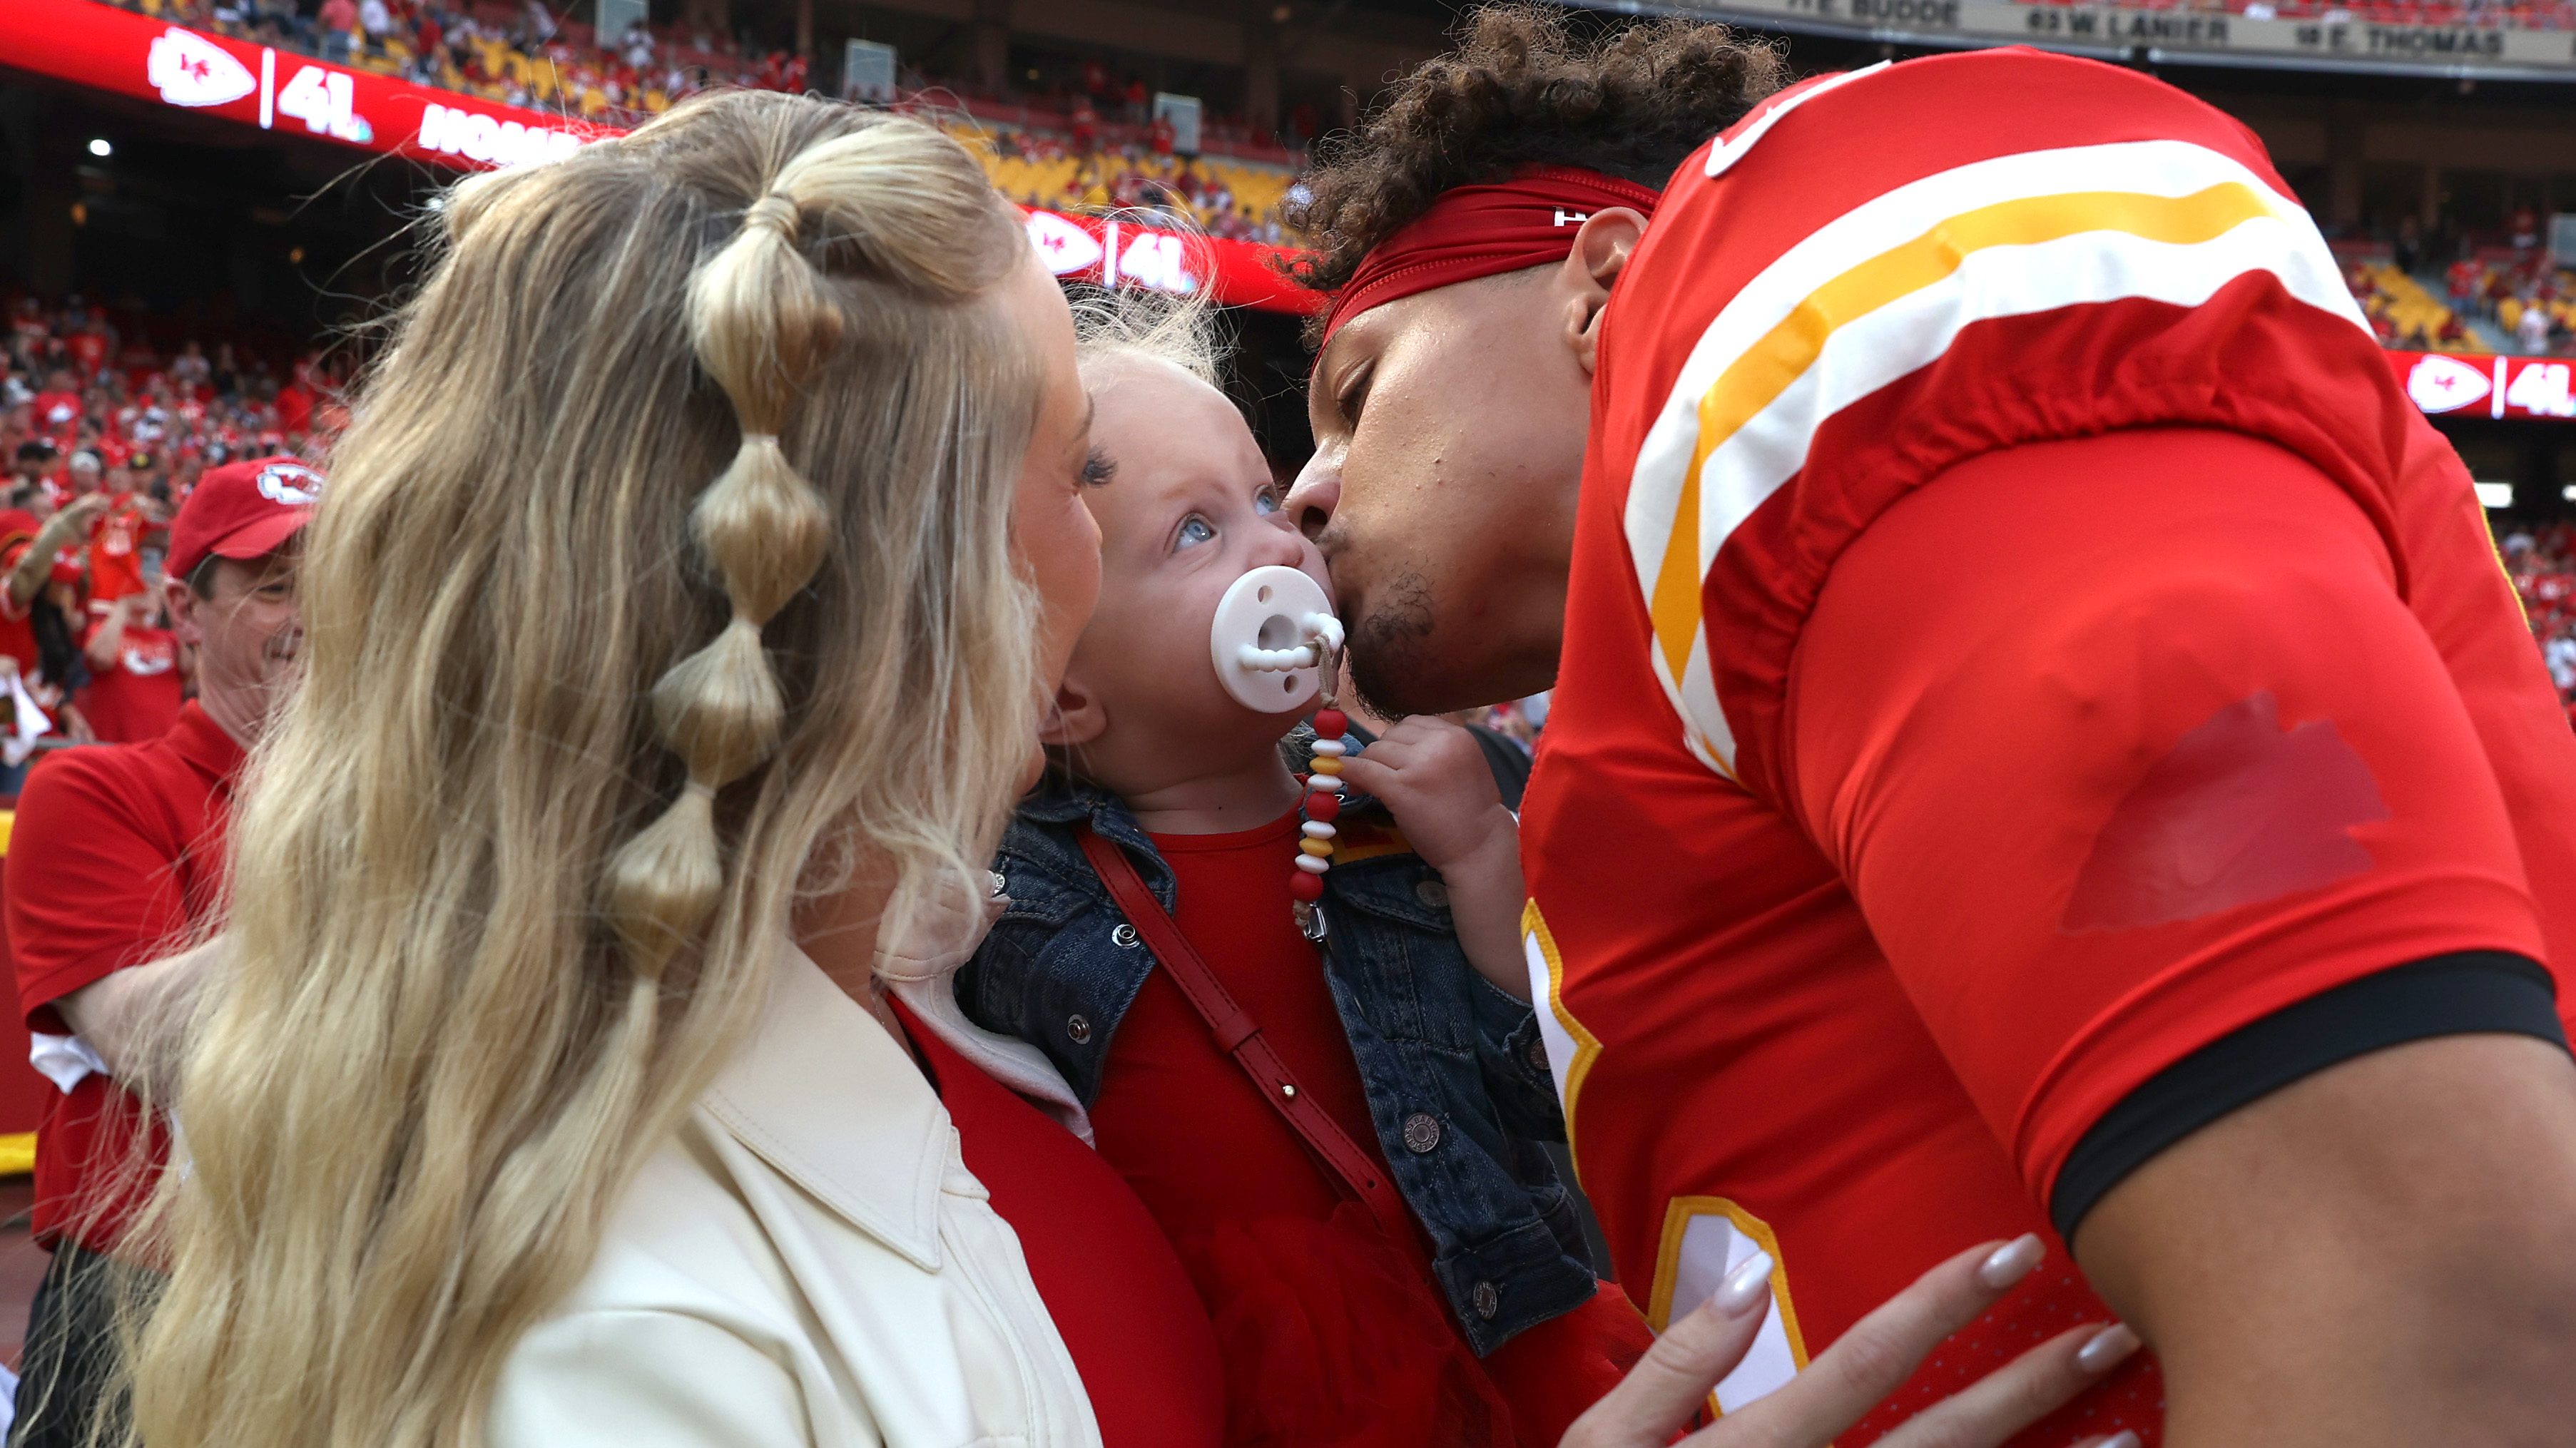 Patrick Mahomes' Mom Shares New Selfies with Taylor Swift